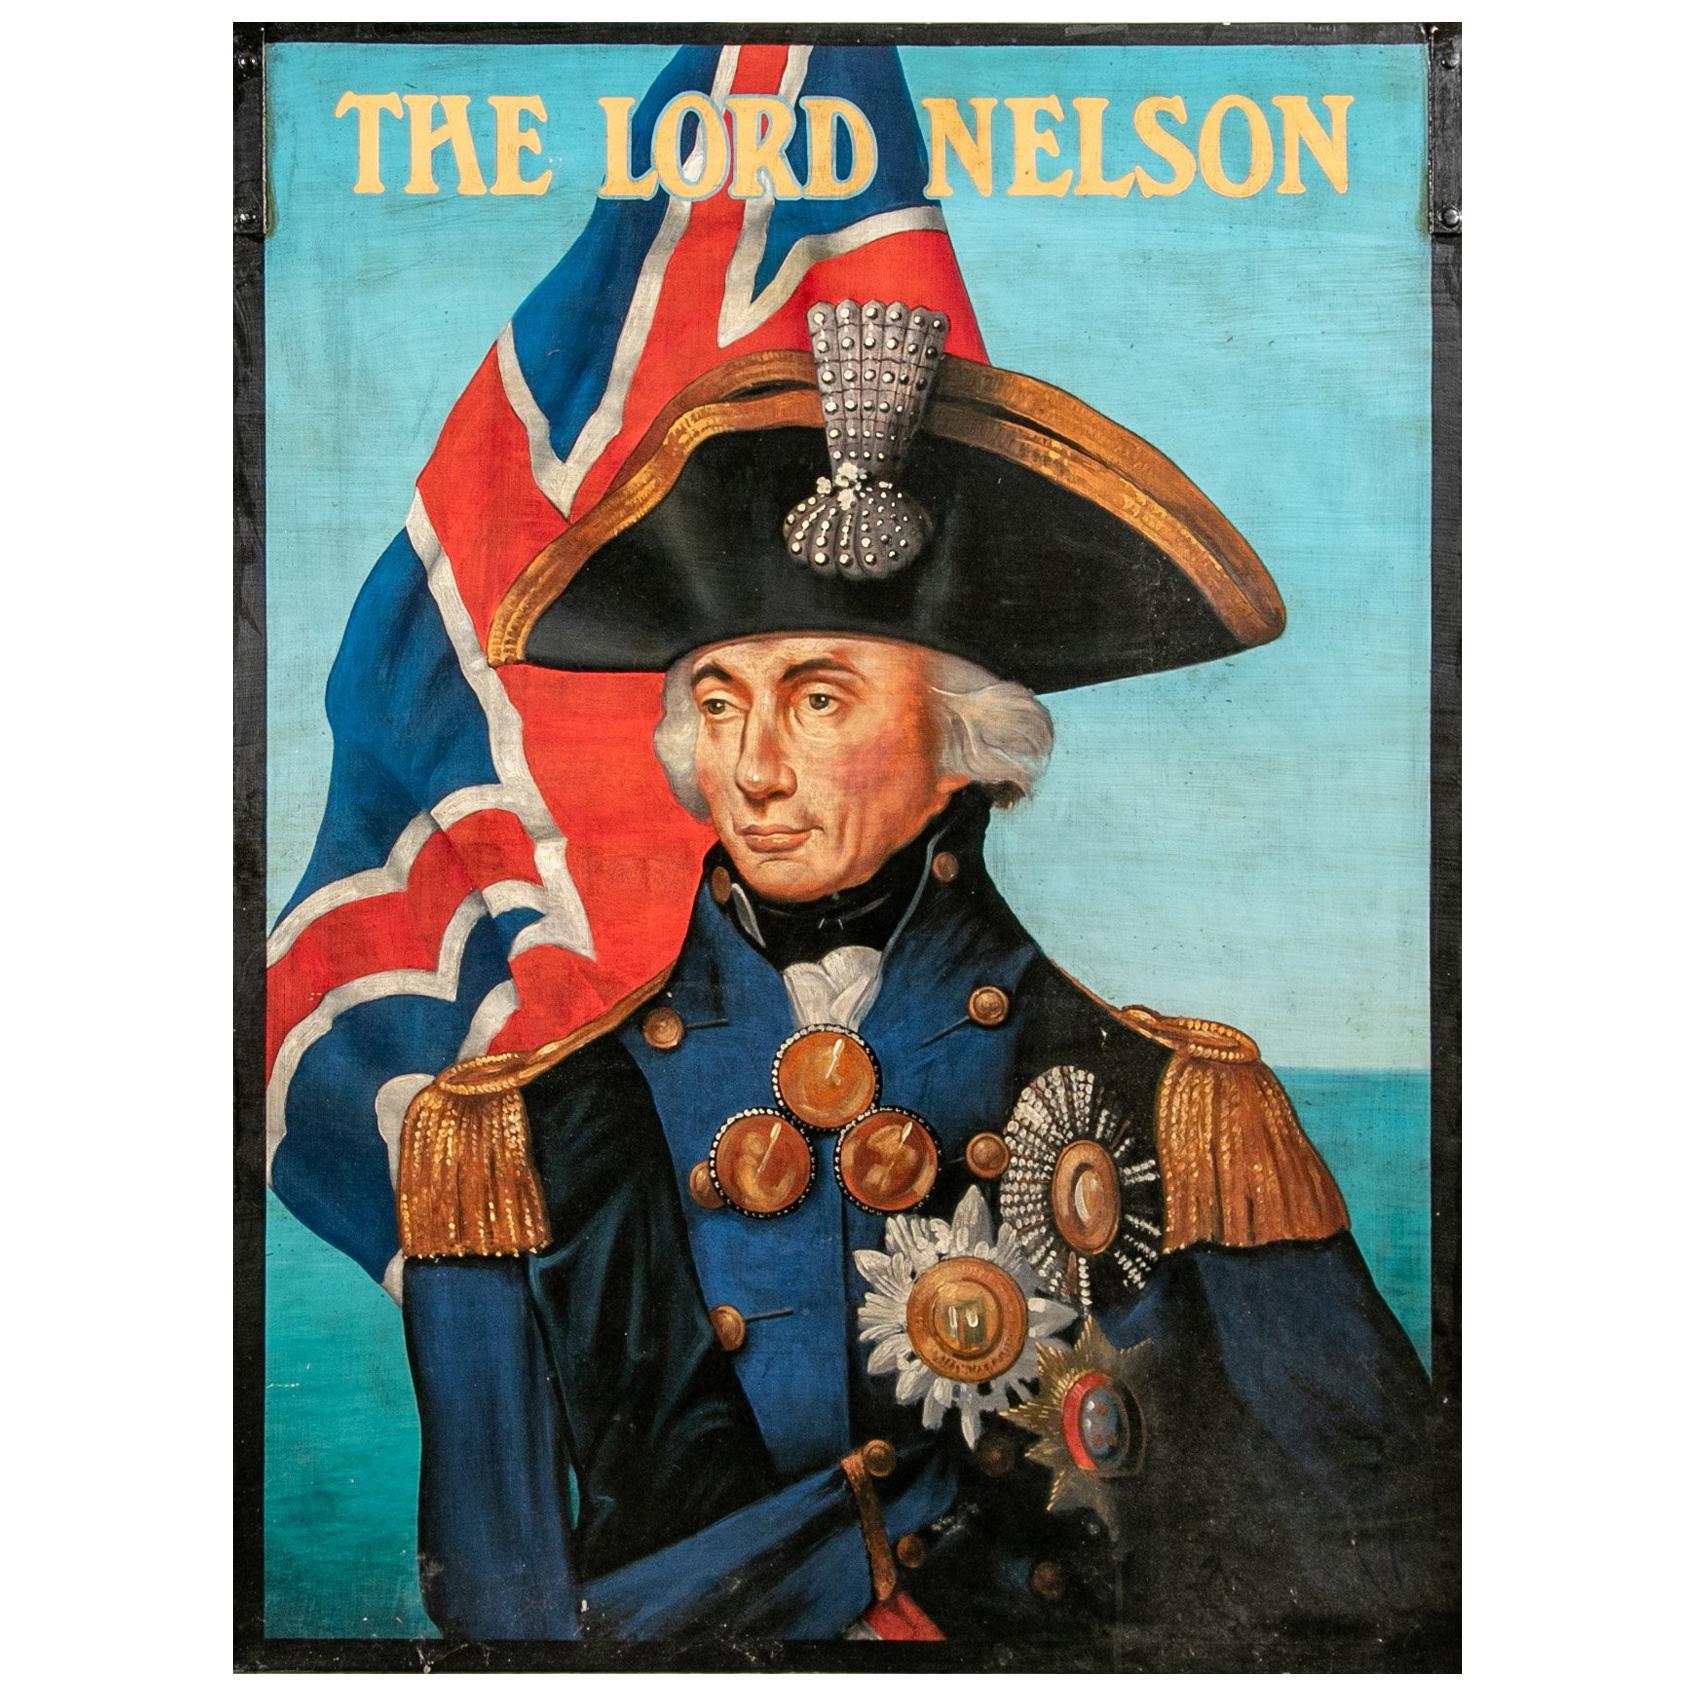 Vintage British Reproduction Pub Sign, "The Lord Nelson" For Sale